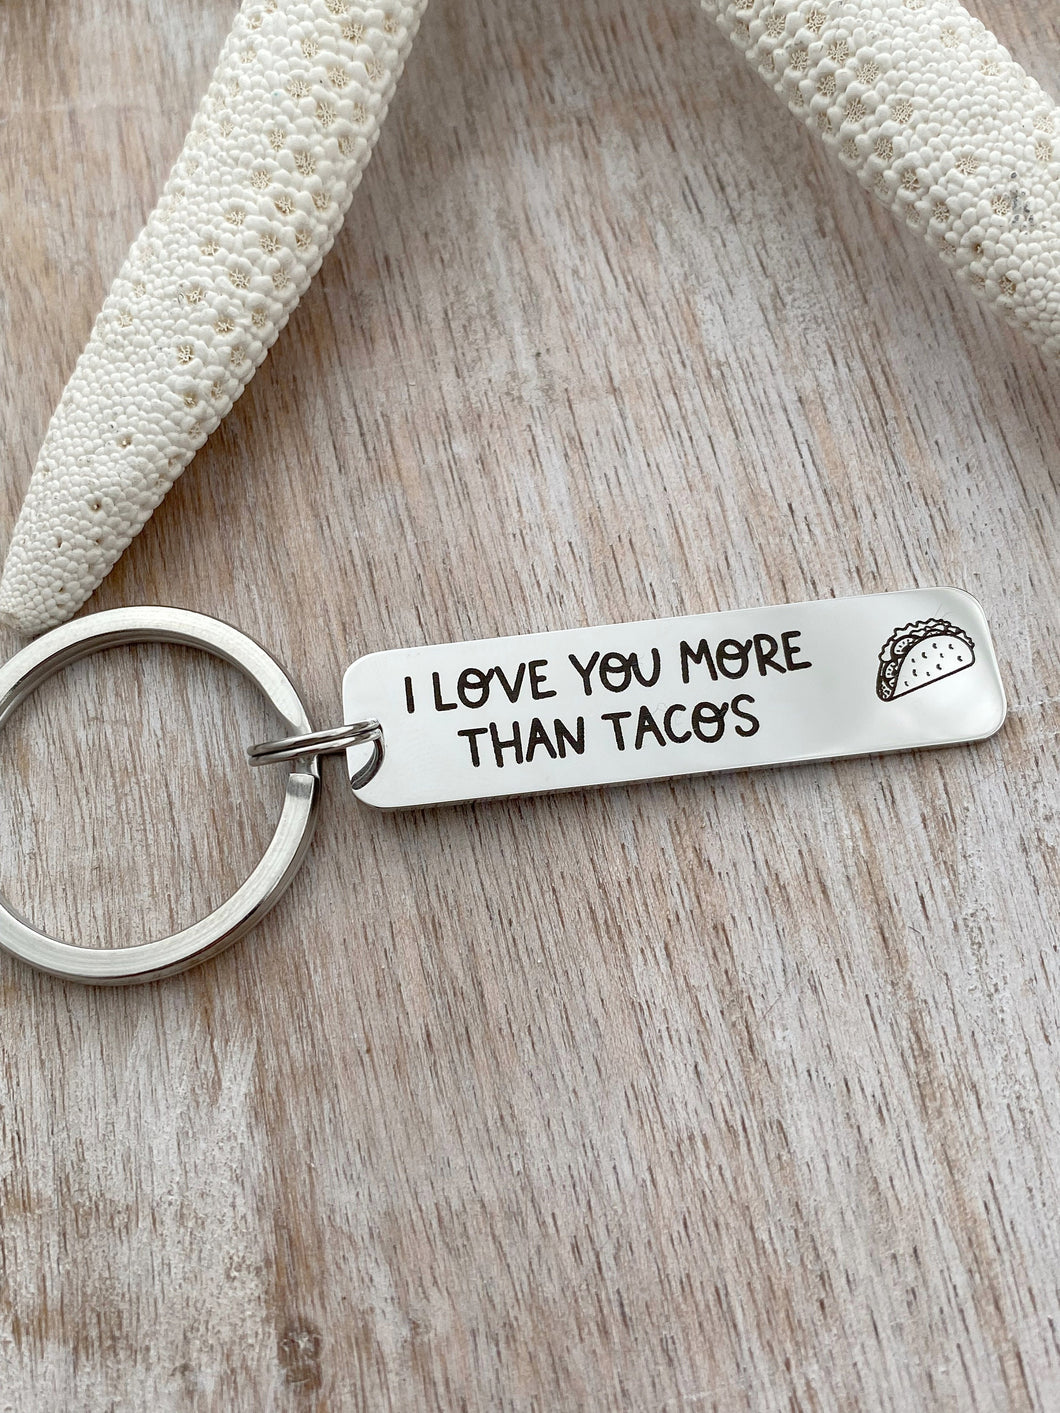 I love you more than tacos keychain - Stainless steel engraved  Bar Key ring - Funny Gift for Him - Valentine's Day gift - gift for friend